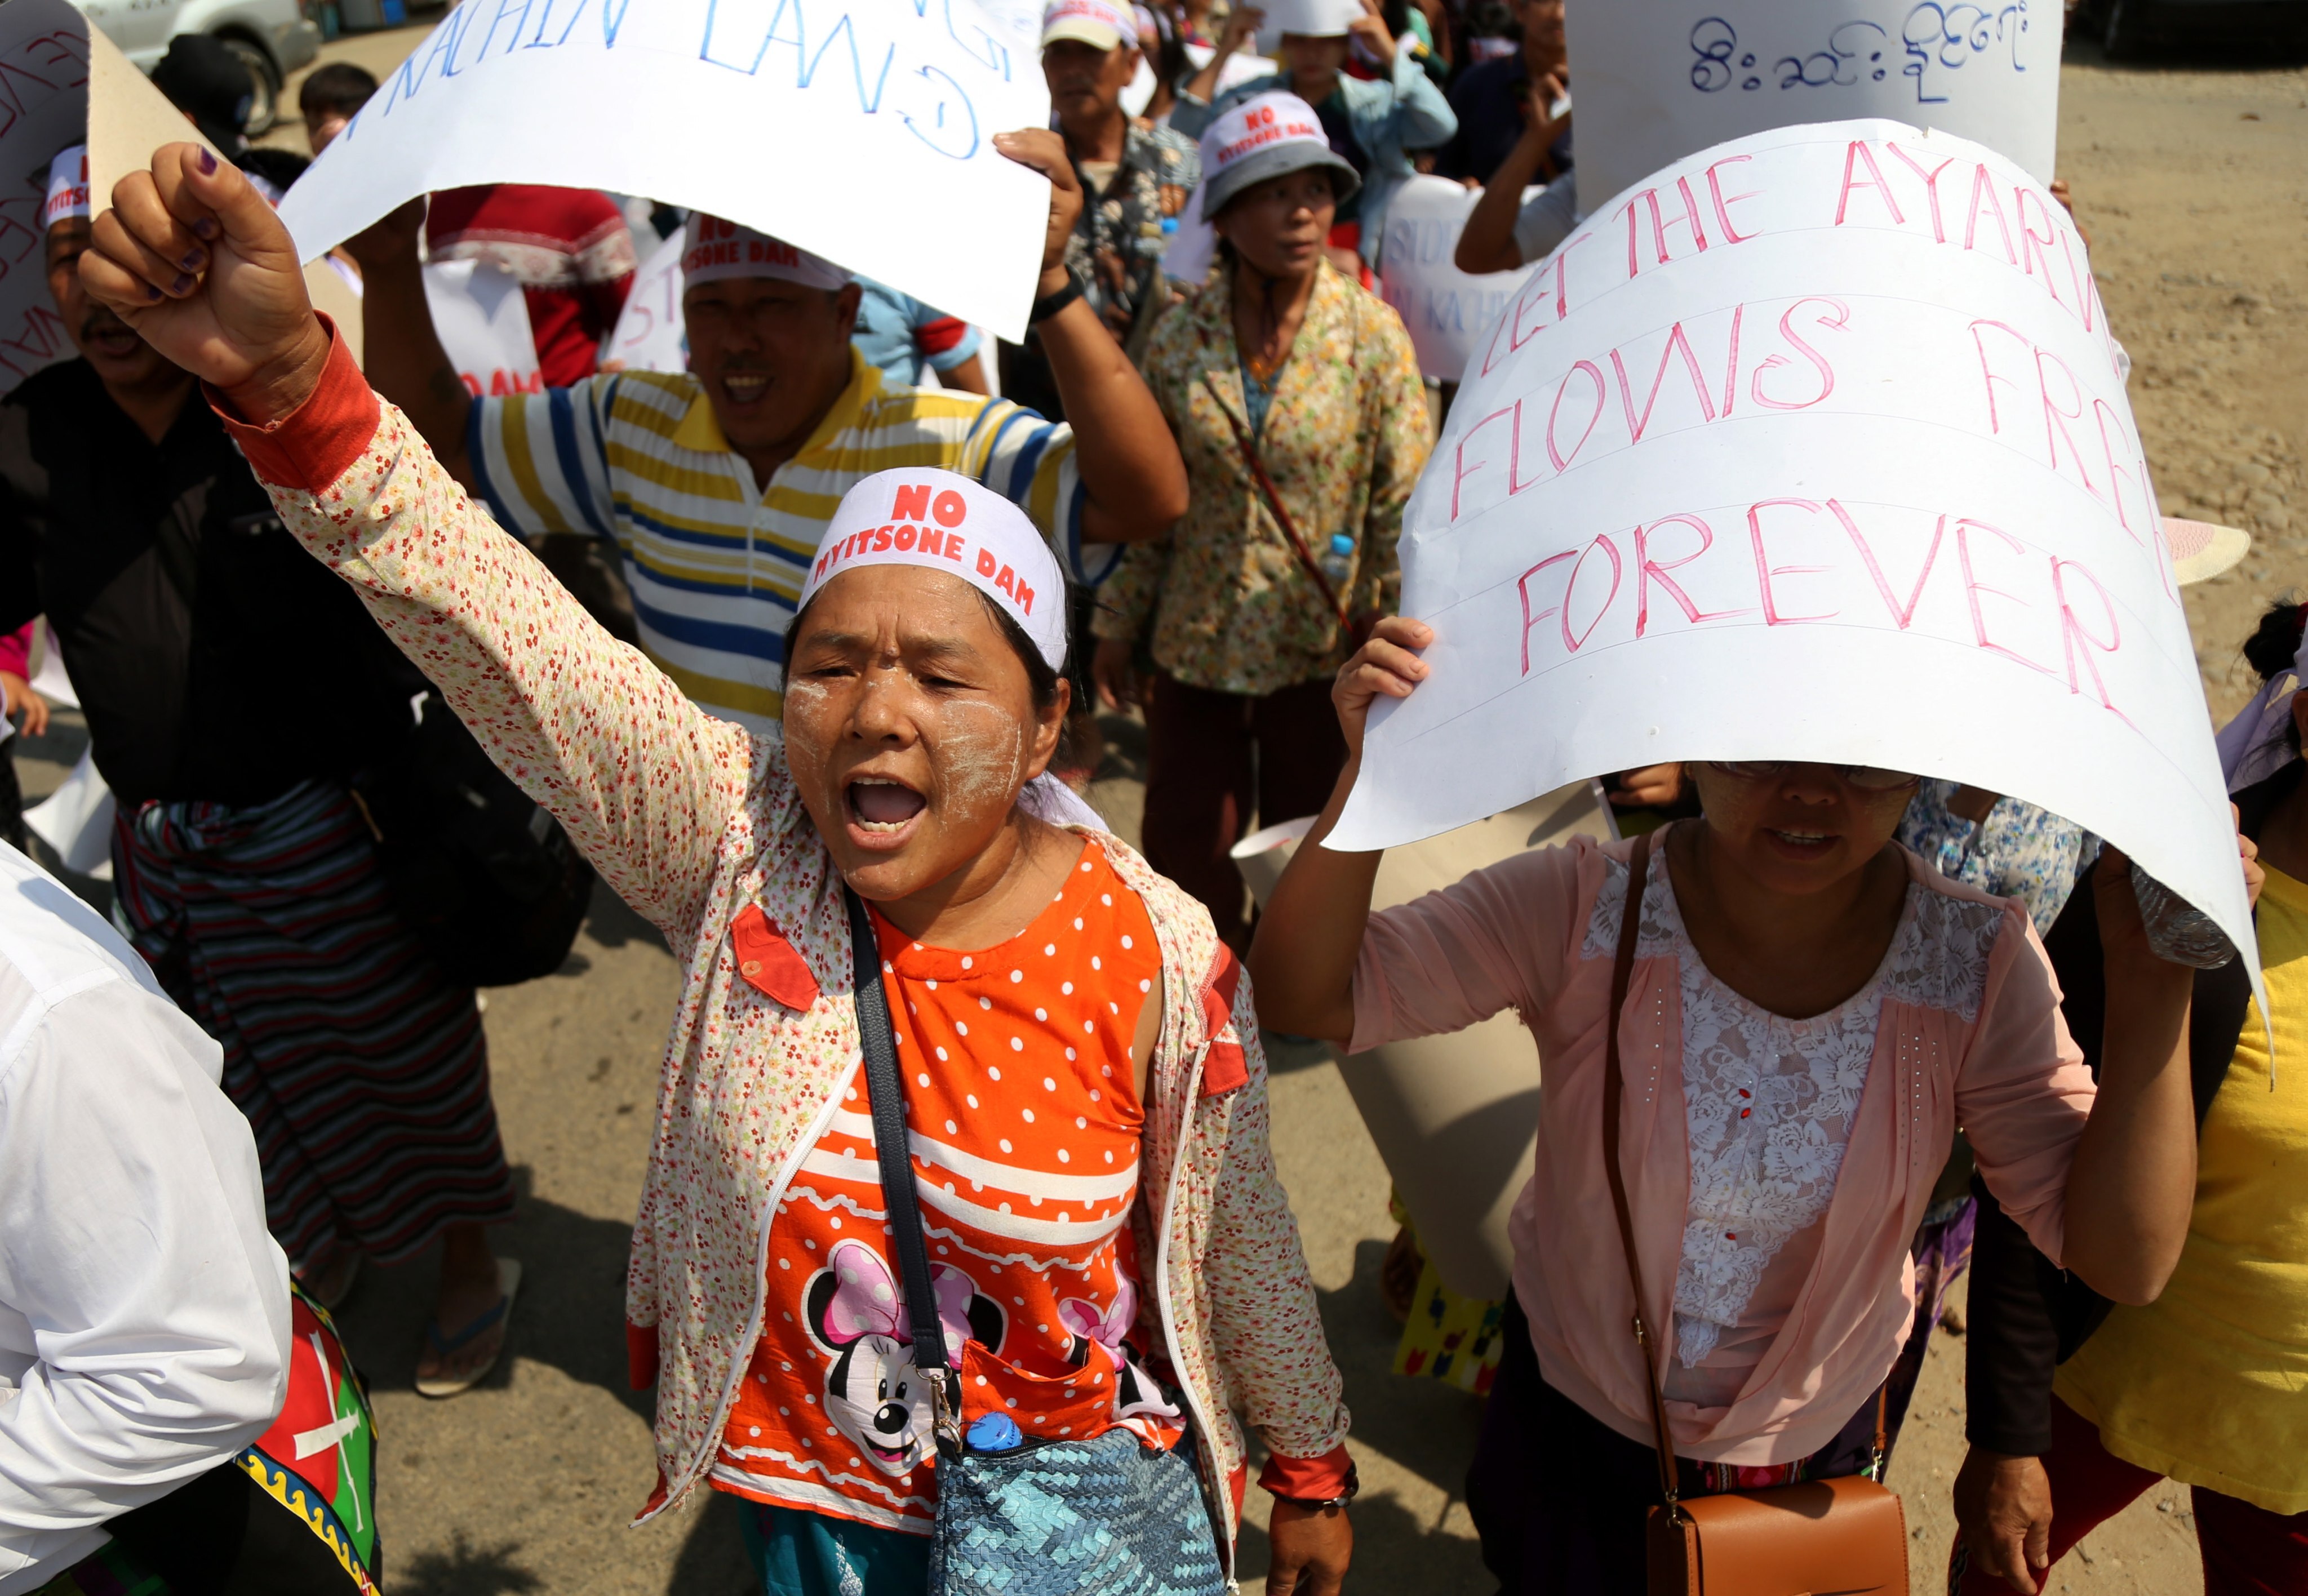 Locals protest against the Irrawaddy Myitsone dam project in Kachin state, Myanmar, on April 22, 2019. The dam is being built by the Myanmar government and China Power Investment Corporation. Chinese SOEs dominate the global dam-building industry. Photo:EPA-EFE